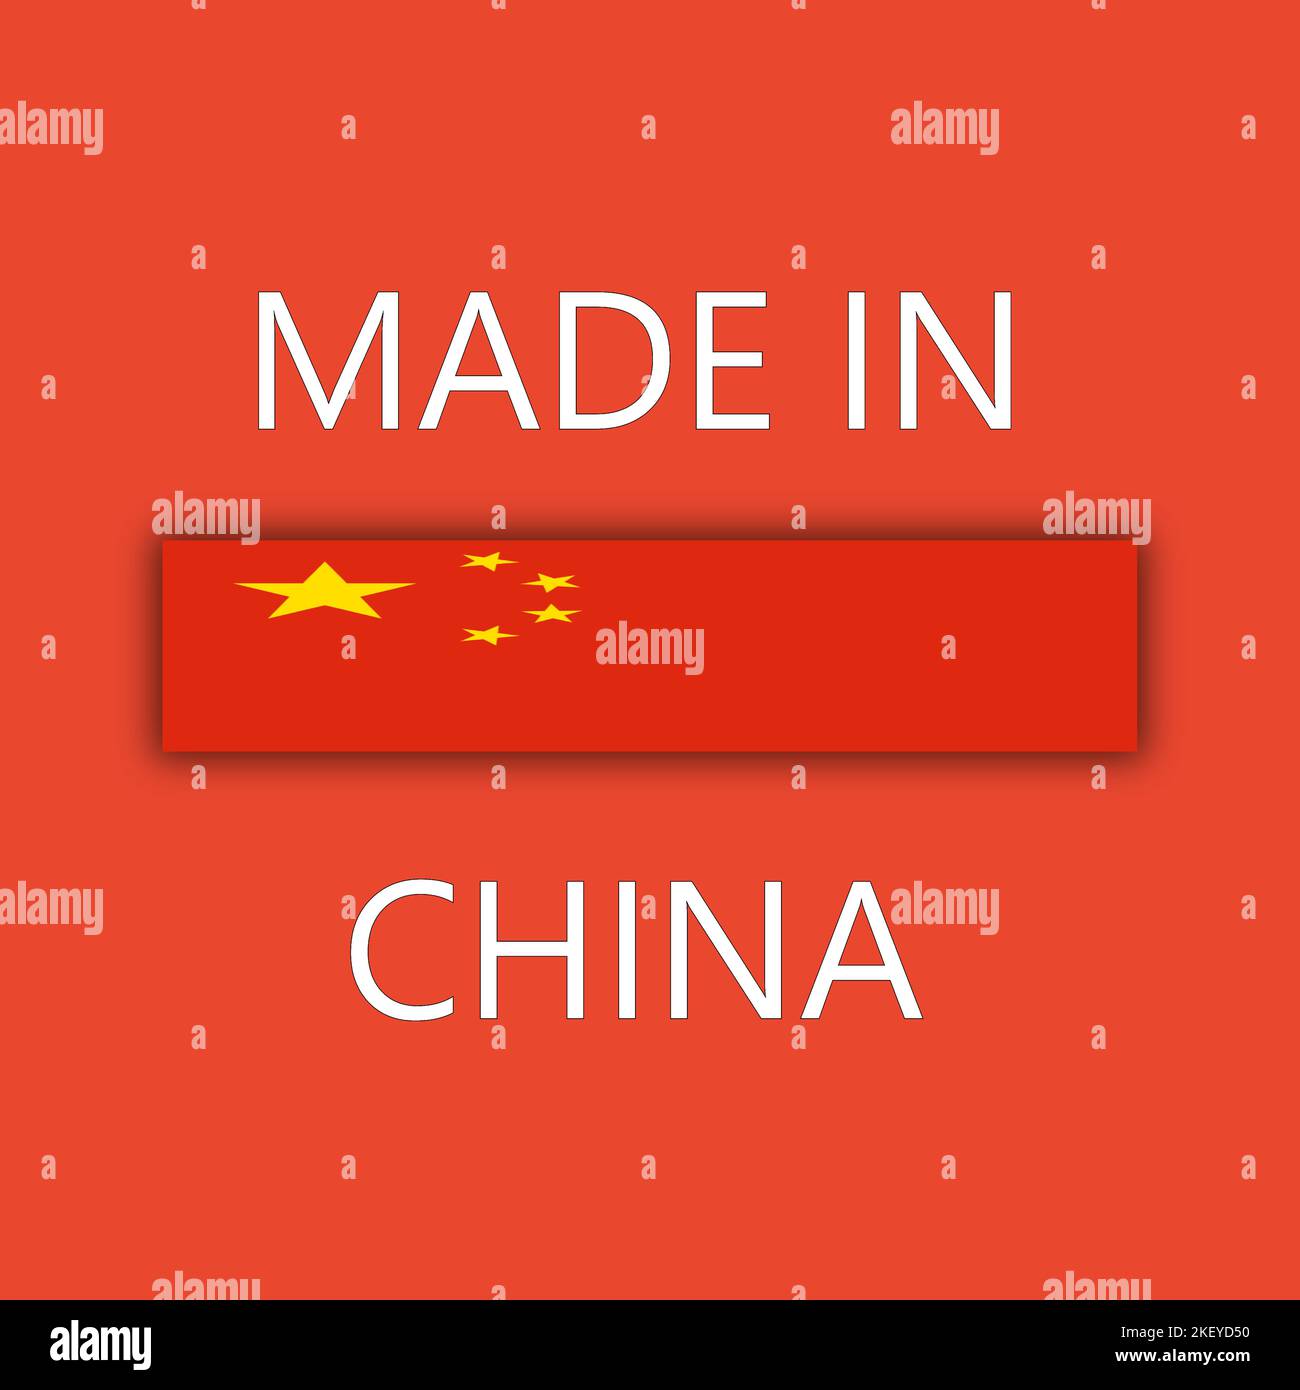 Made in China vector illustration. Stock Vector